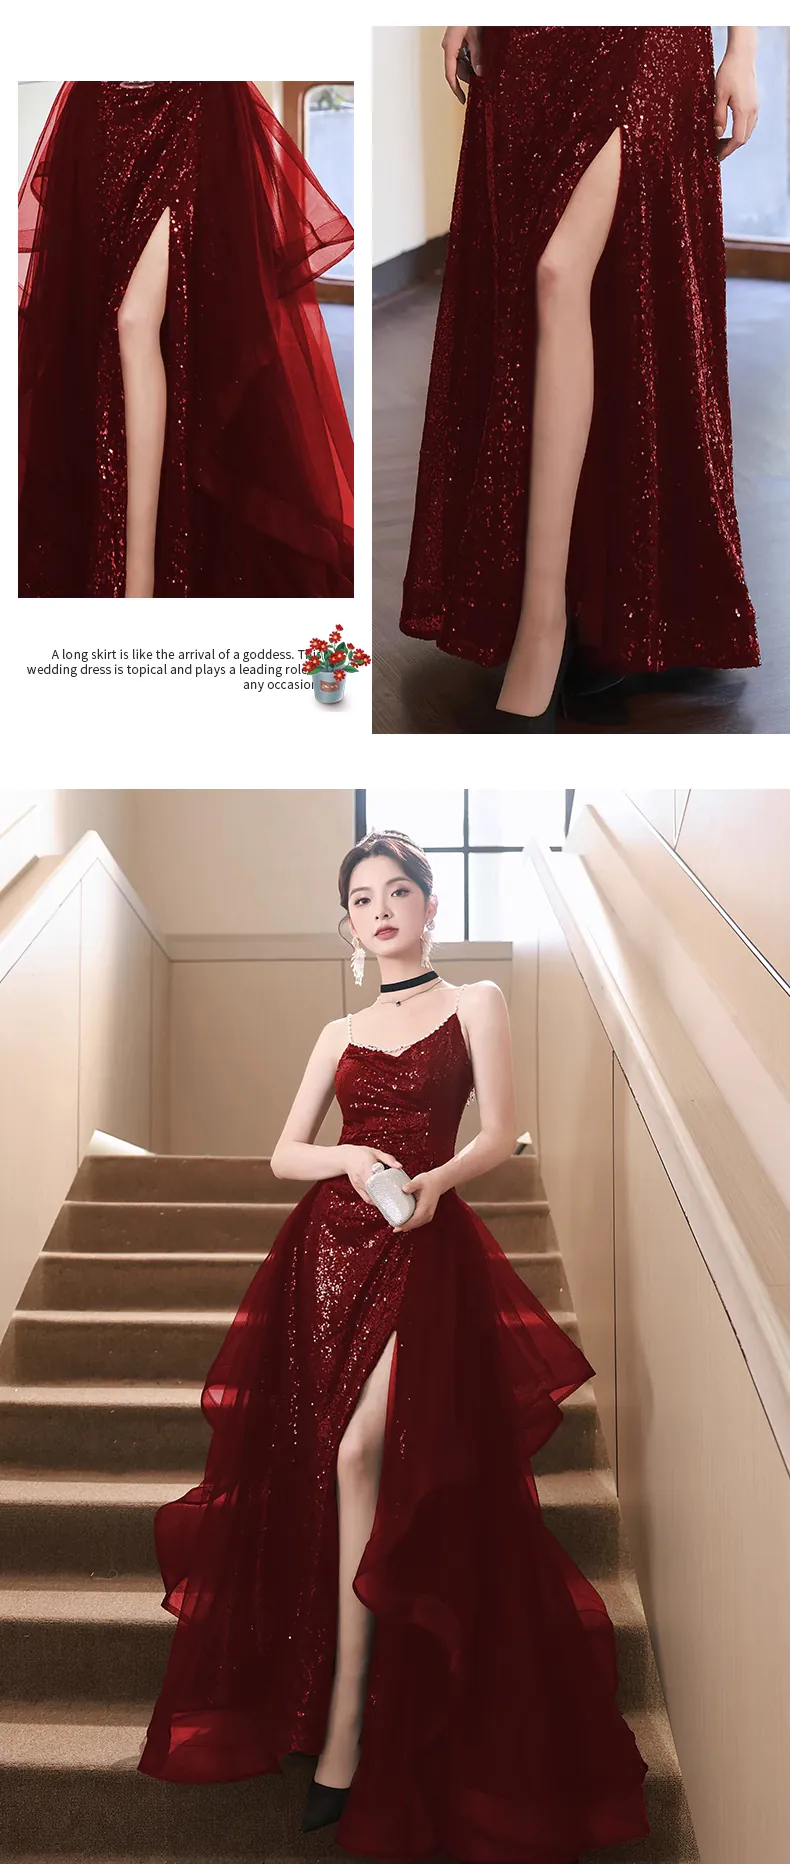 Sexy-Wine-Red-Sleeveless-Split-Formal-Cocktail-Slip-Dress-Evening-Gown11